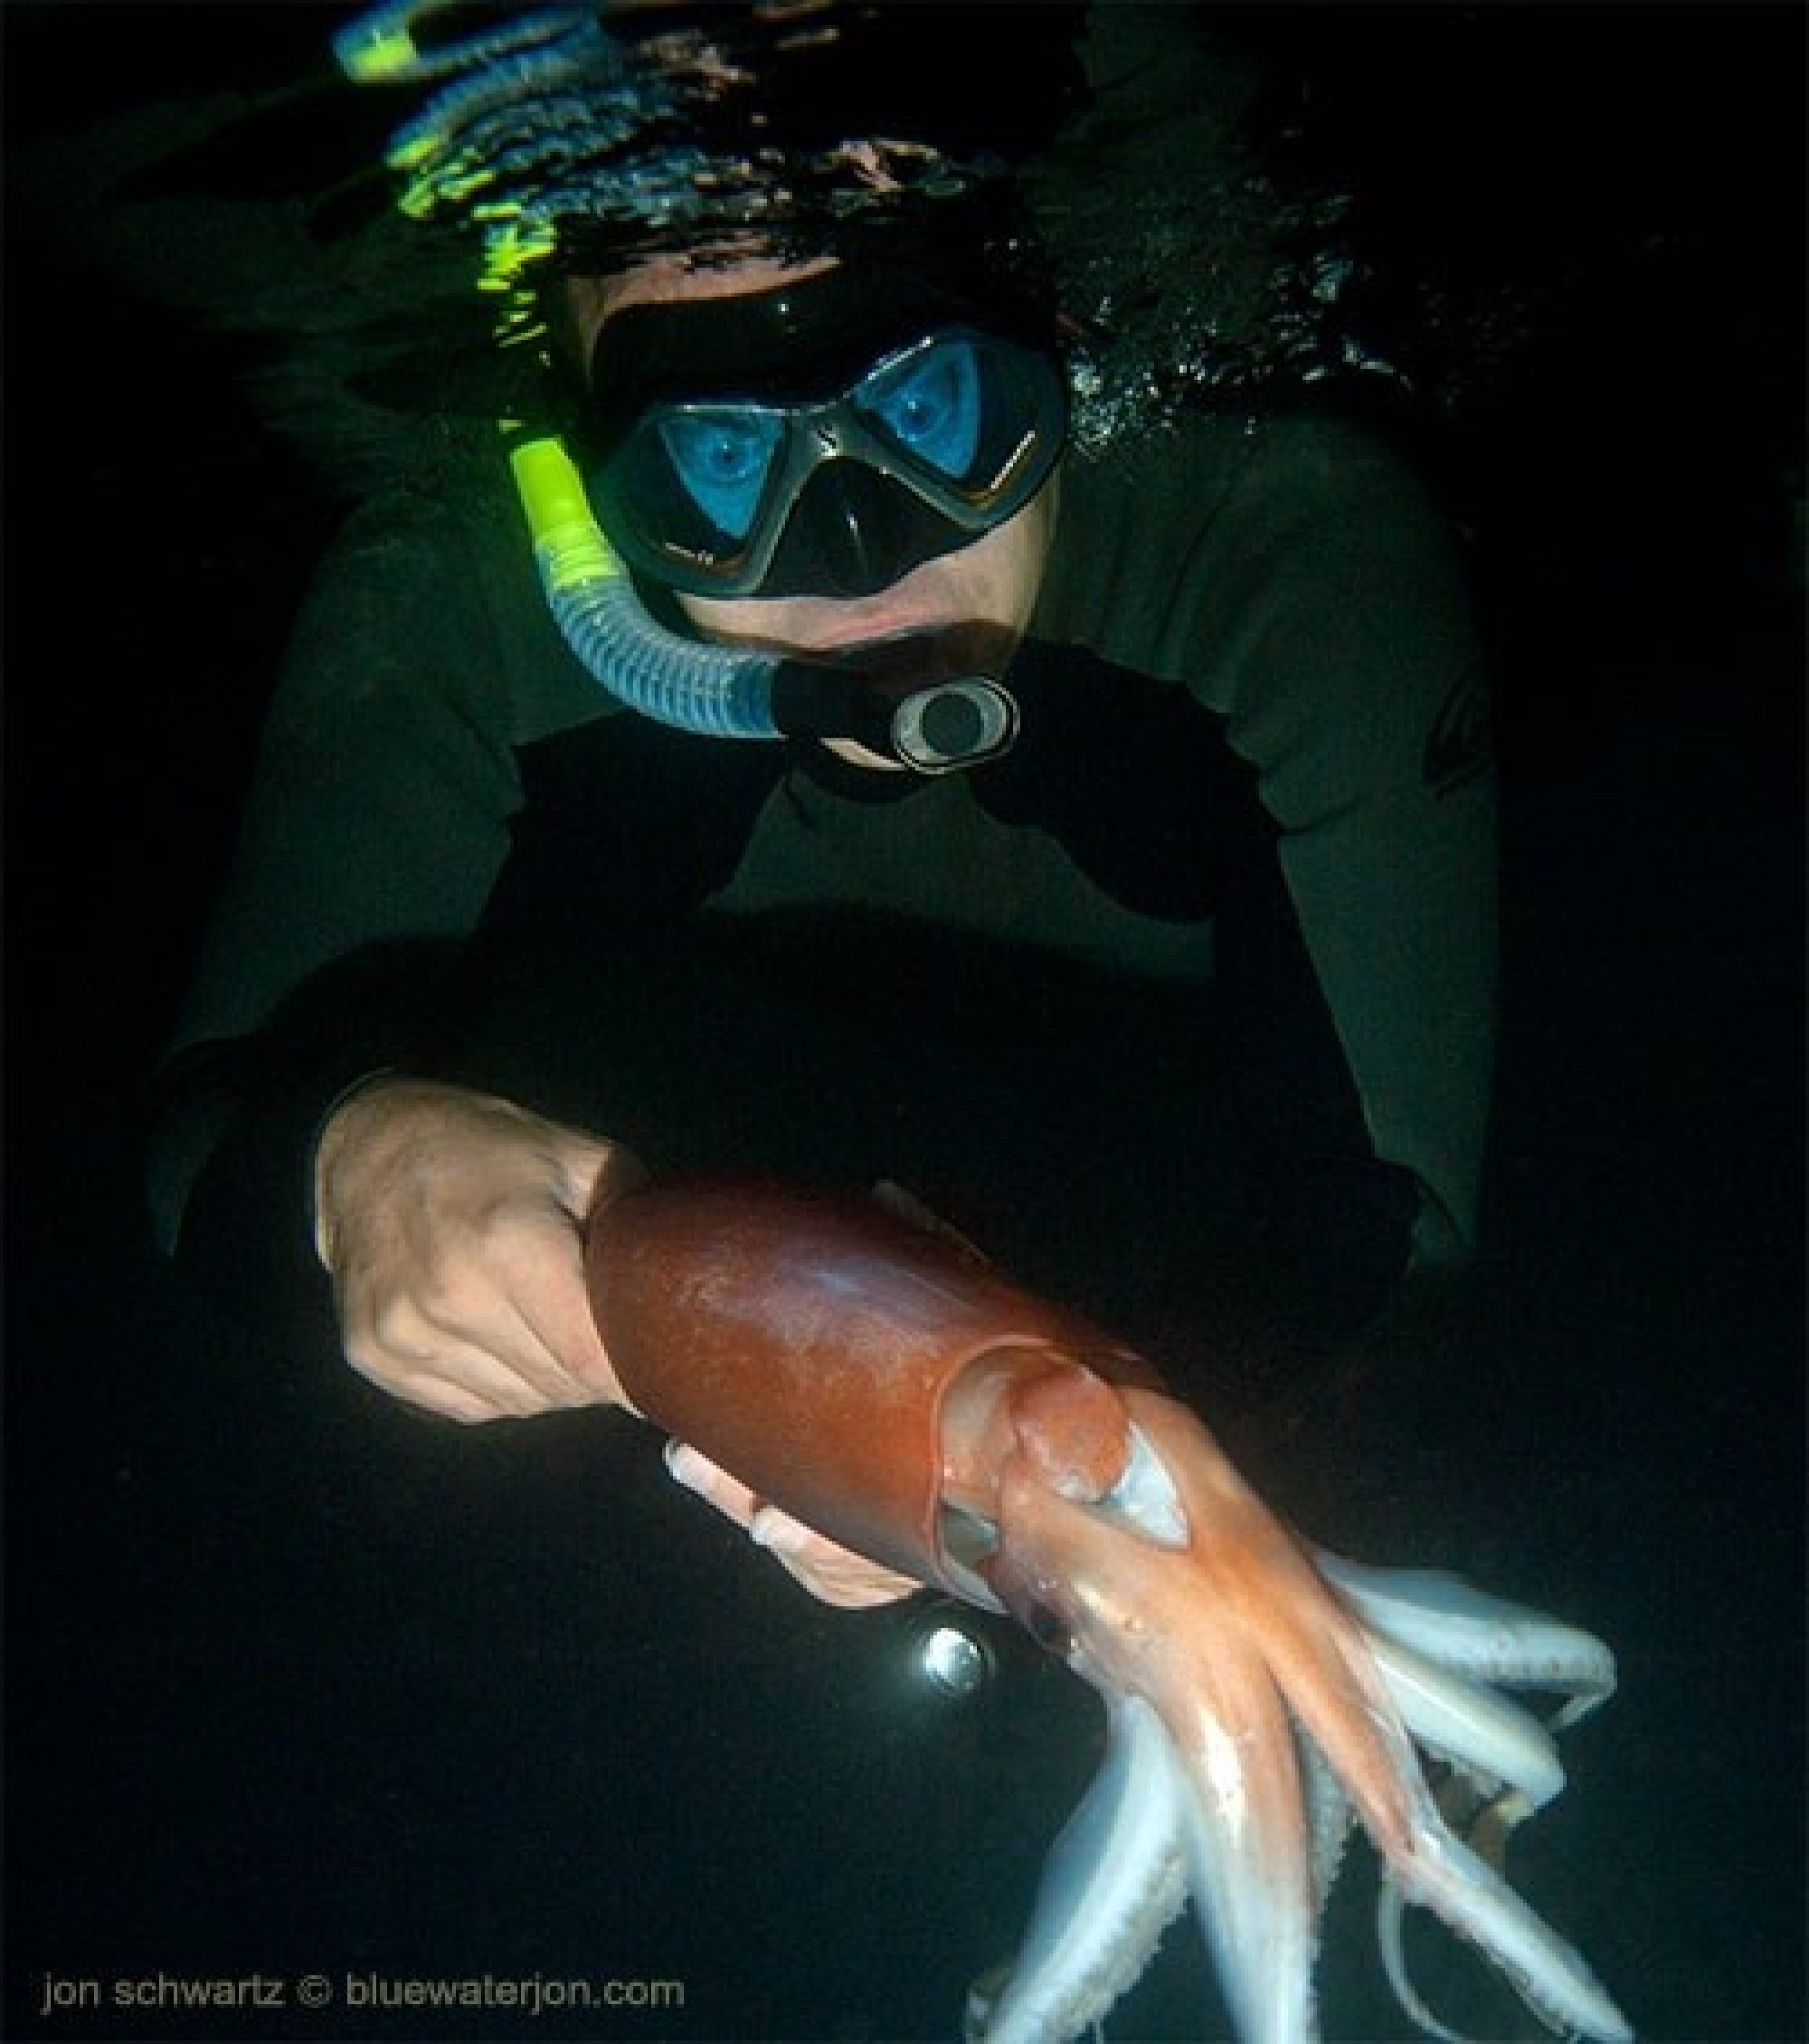 Humboldt Squid Invades Southern California Beaches